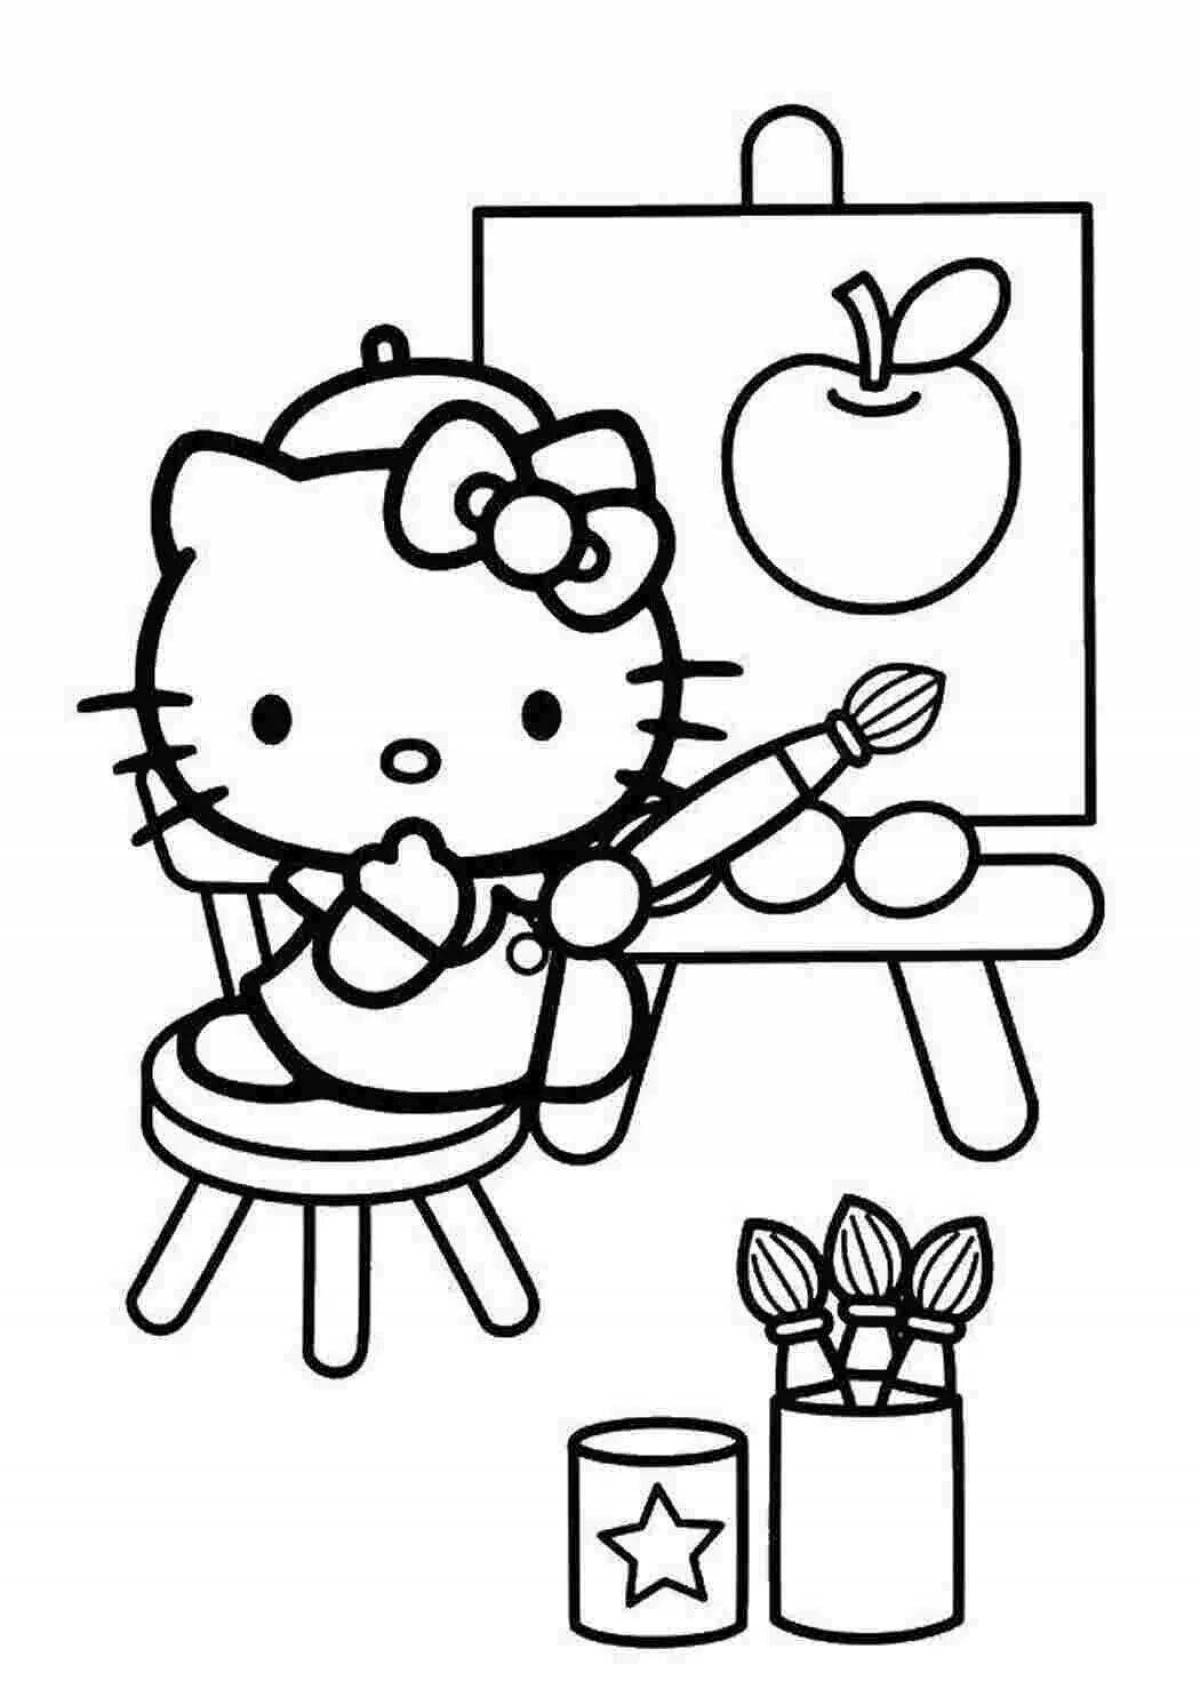 Witty penguin hello kitty coloring book